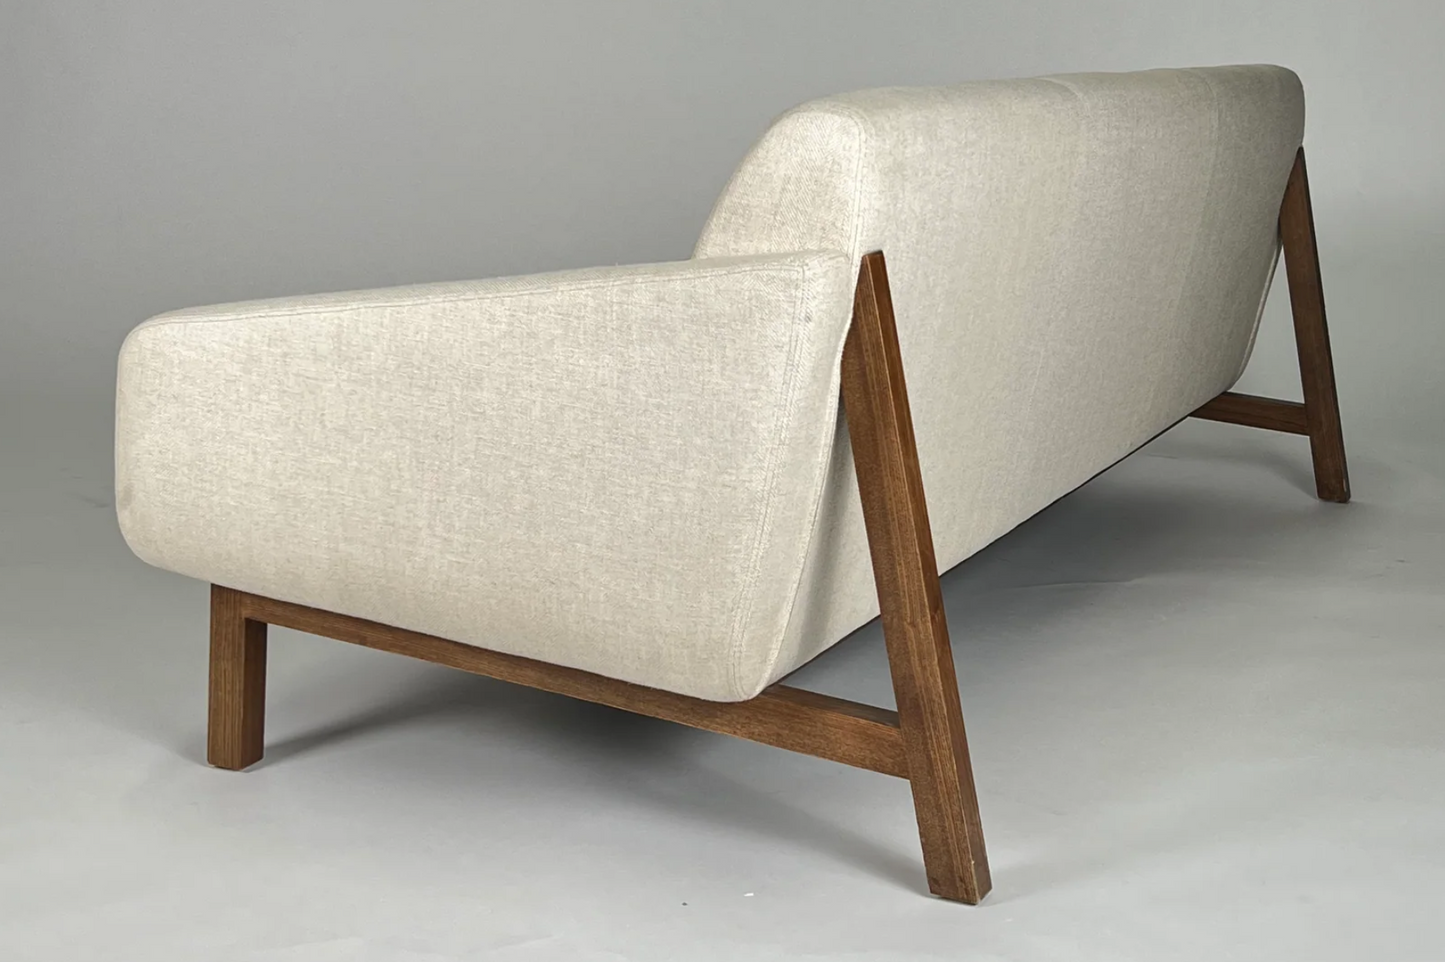 Cream sofa with wood frame, wood back legs, mid-century styling